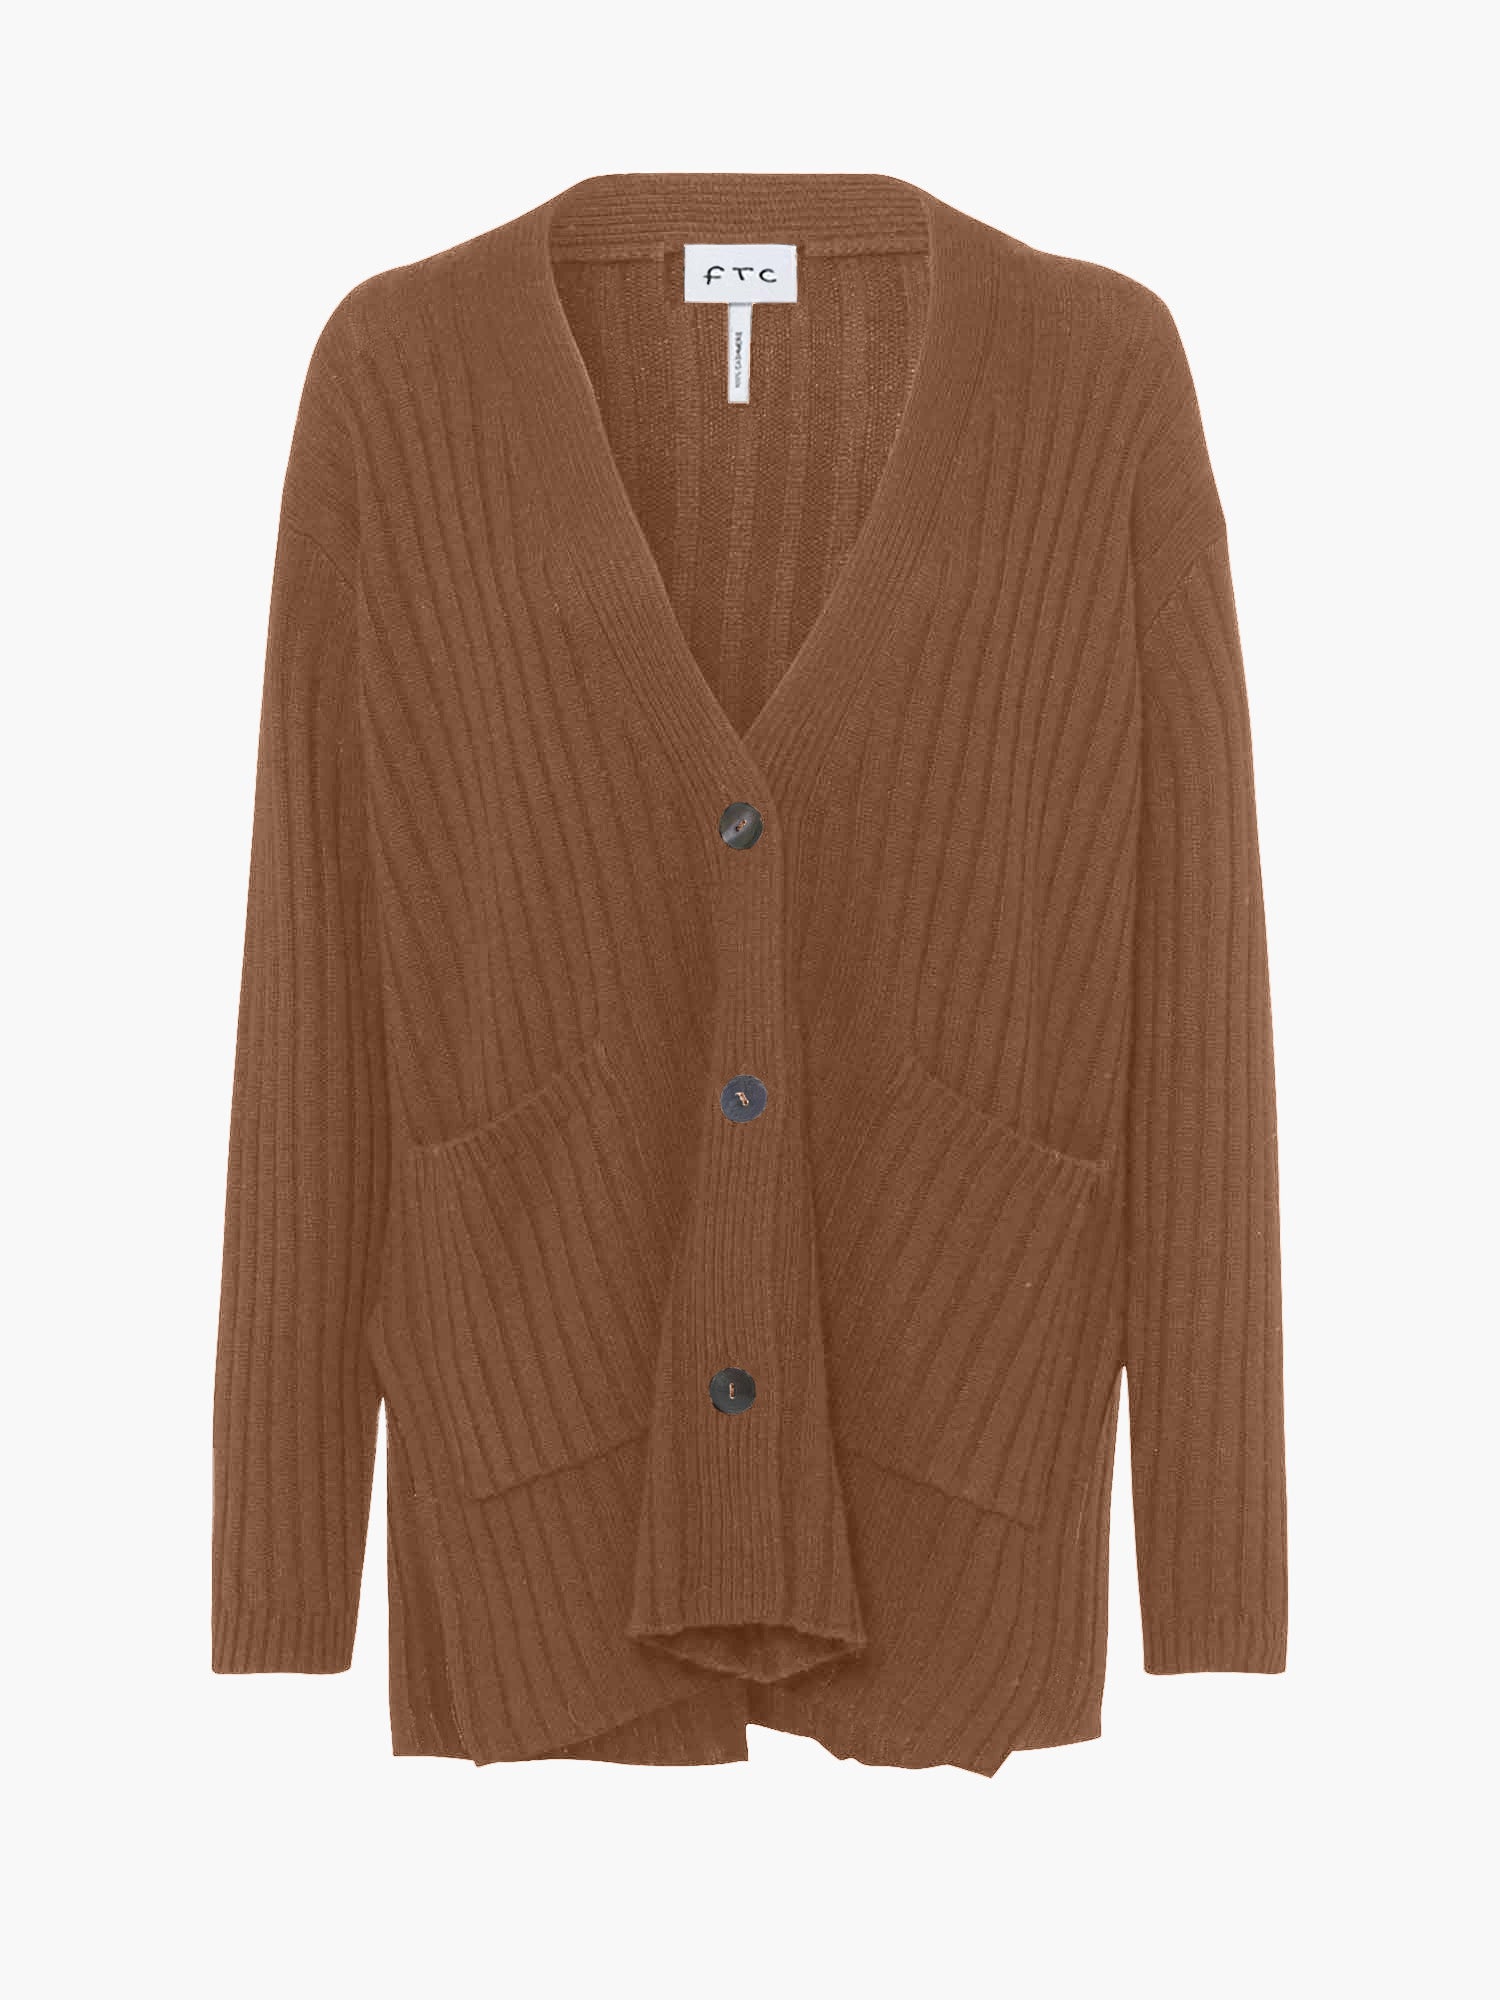 FTC-Cashmere-OUTLET-SALE-Cardigan-VN-Strick-ARCHIVE-COLLECTION_84b7ad43-5624-45bd-9df2-da5bf7e7f55d.jpg